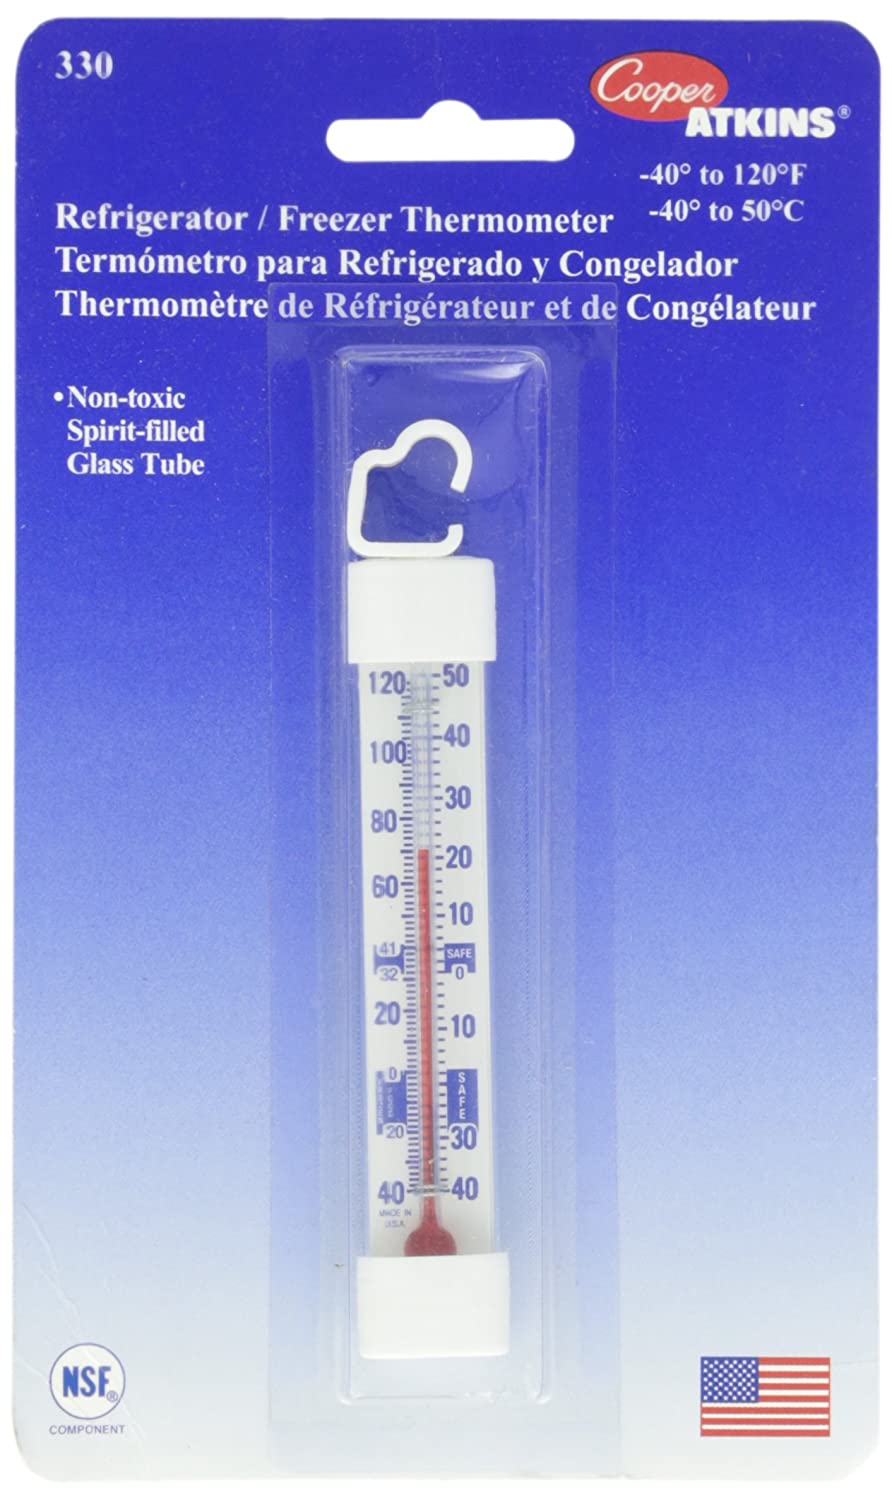 Vertical Glass Tube Refrigerator/Freezer Thermometer